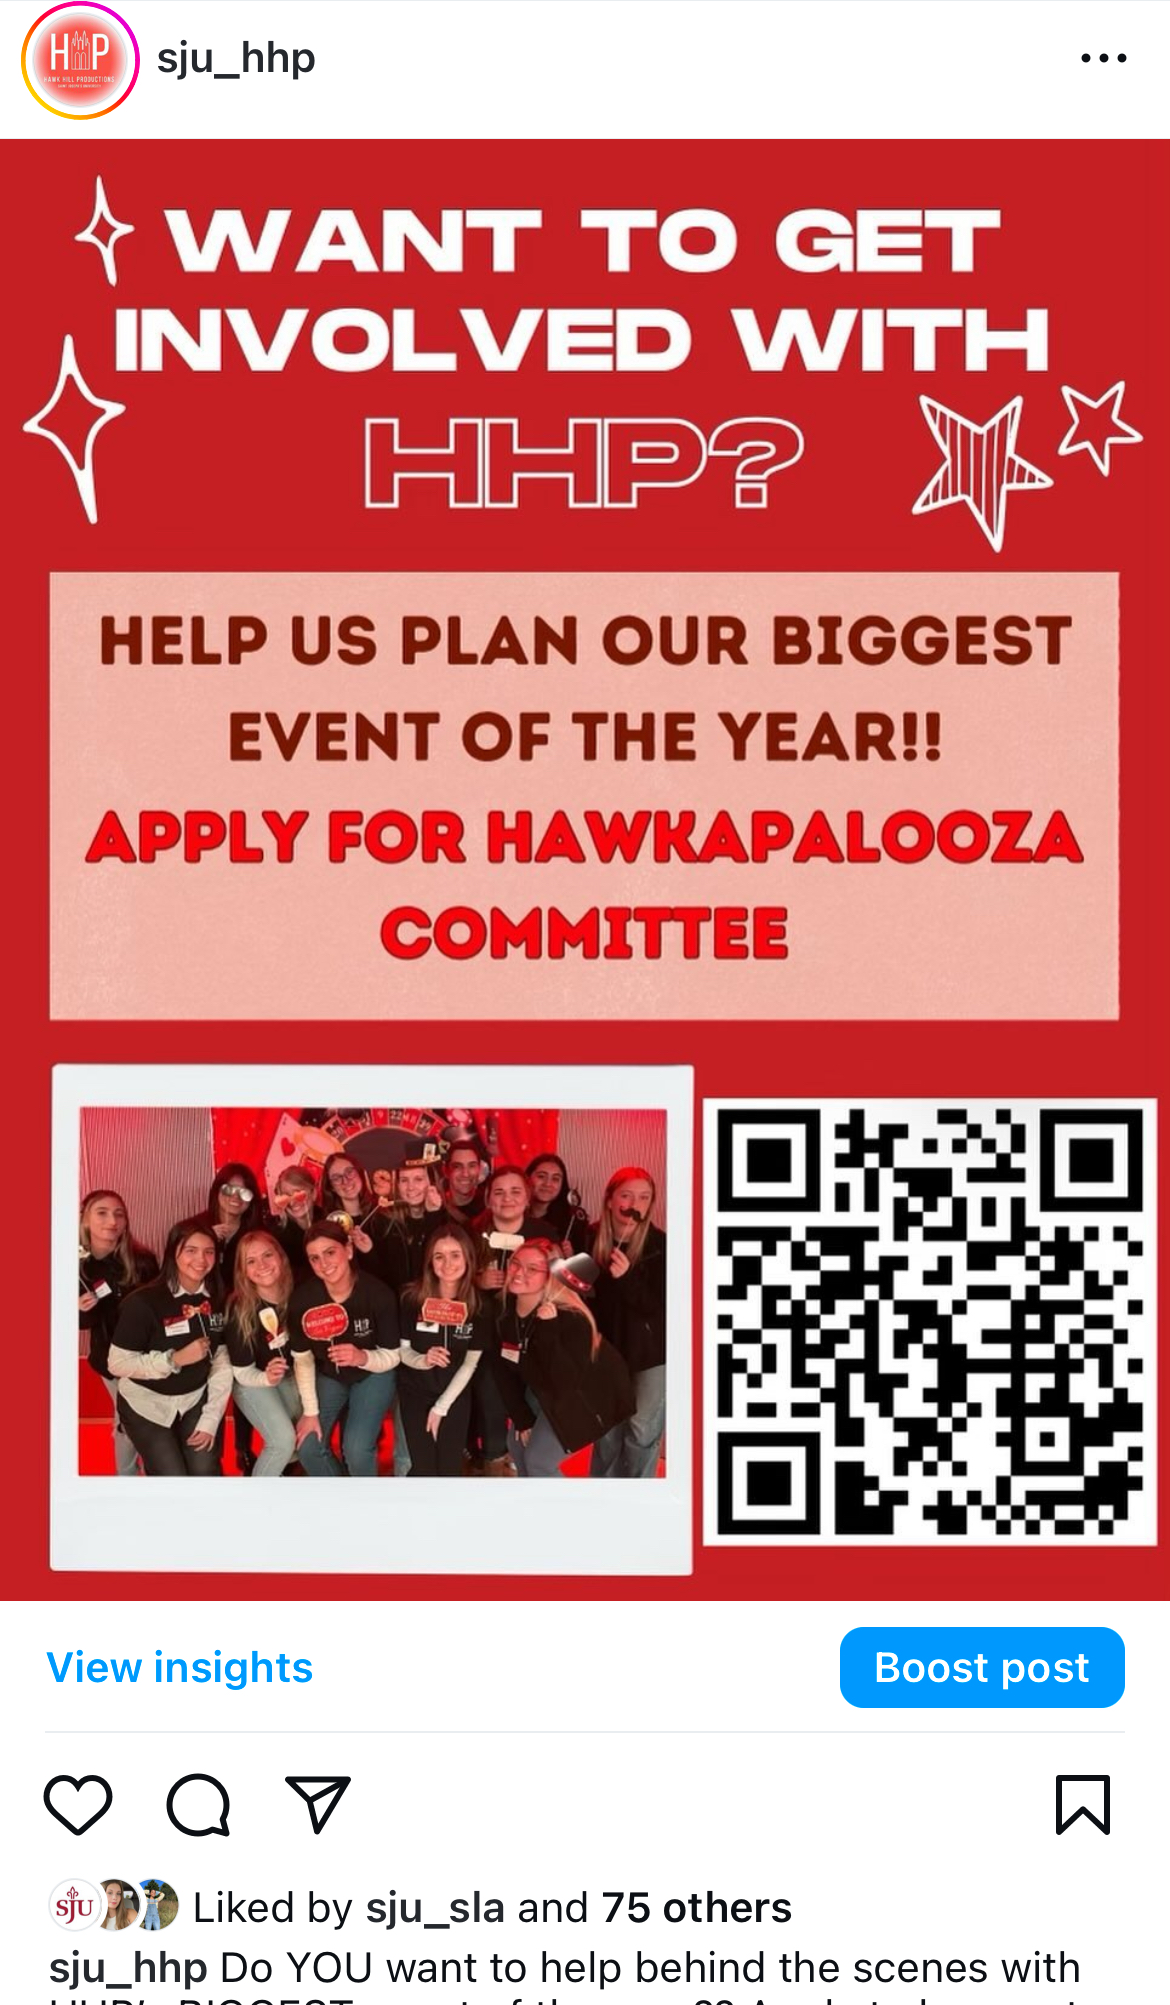 this image is an instagram post with red coloring highlighting an application opening for a committee of Hawk Hill Productions, a student group at Saint Joseph's University